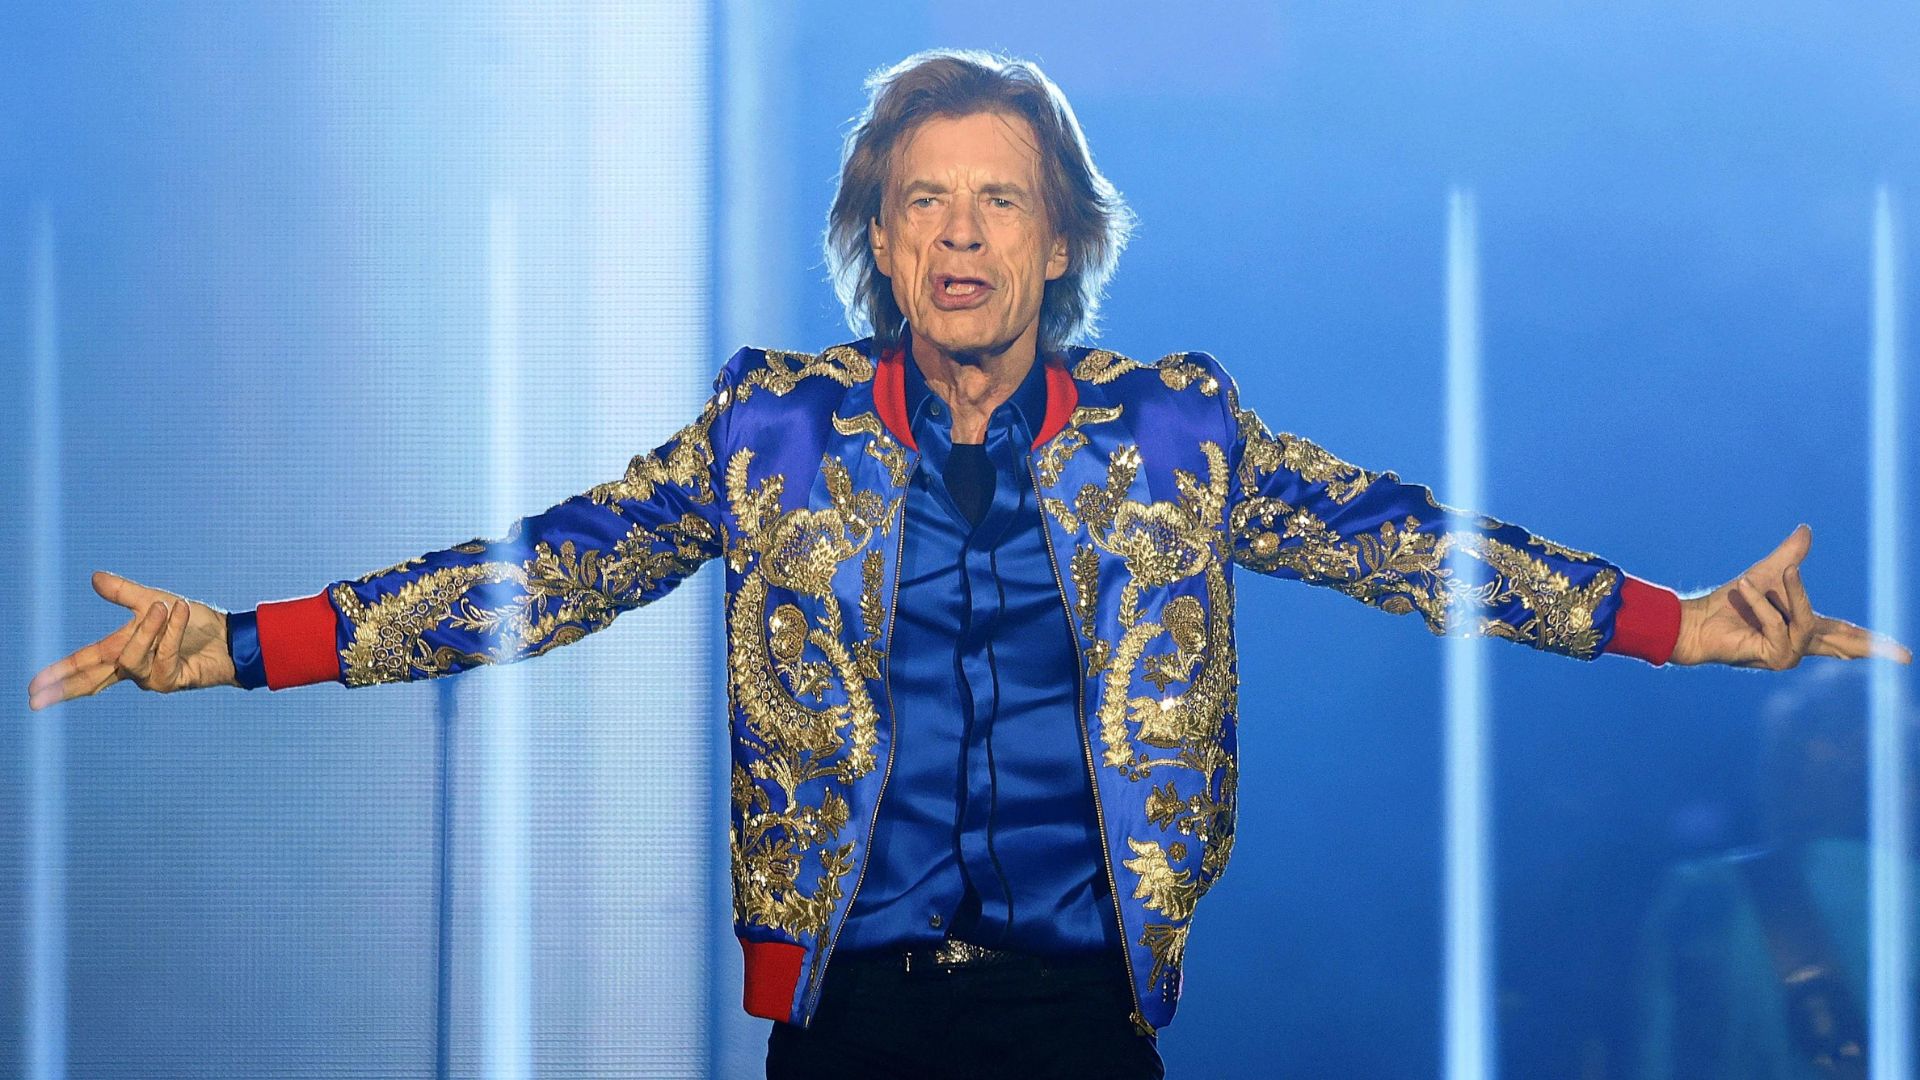 Mick Jagger Wearing A Blue With Gold Accent Coat